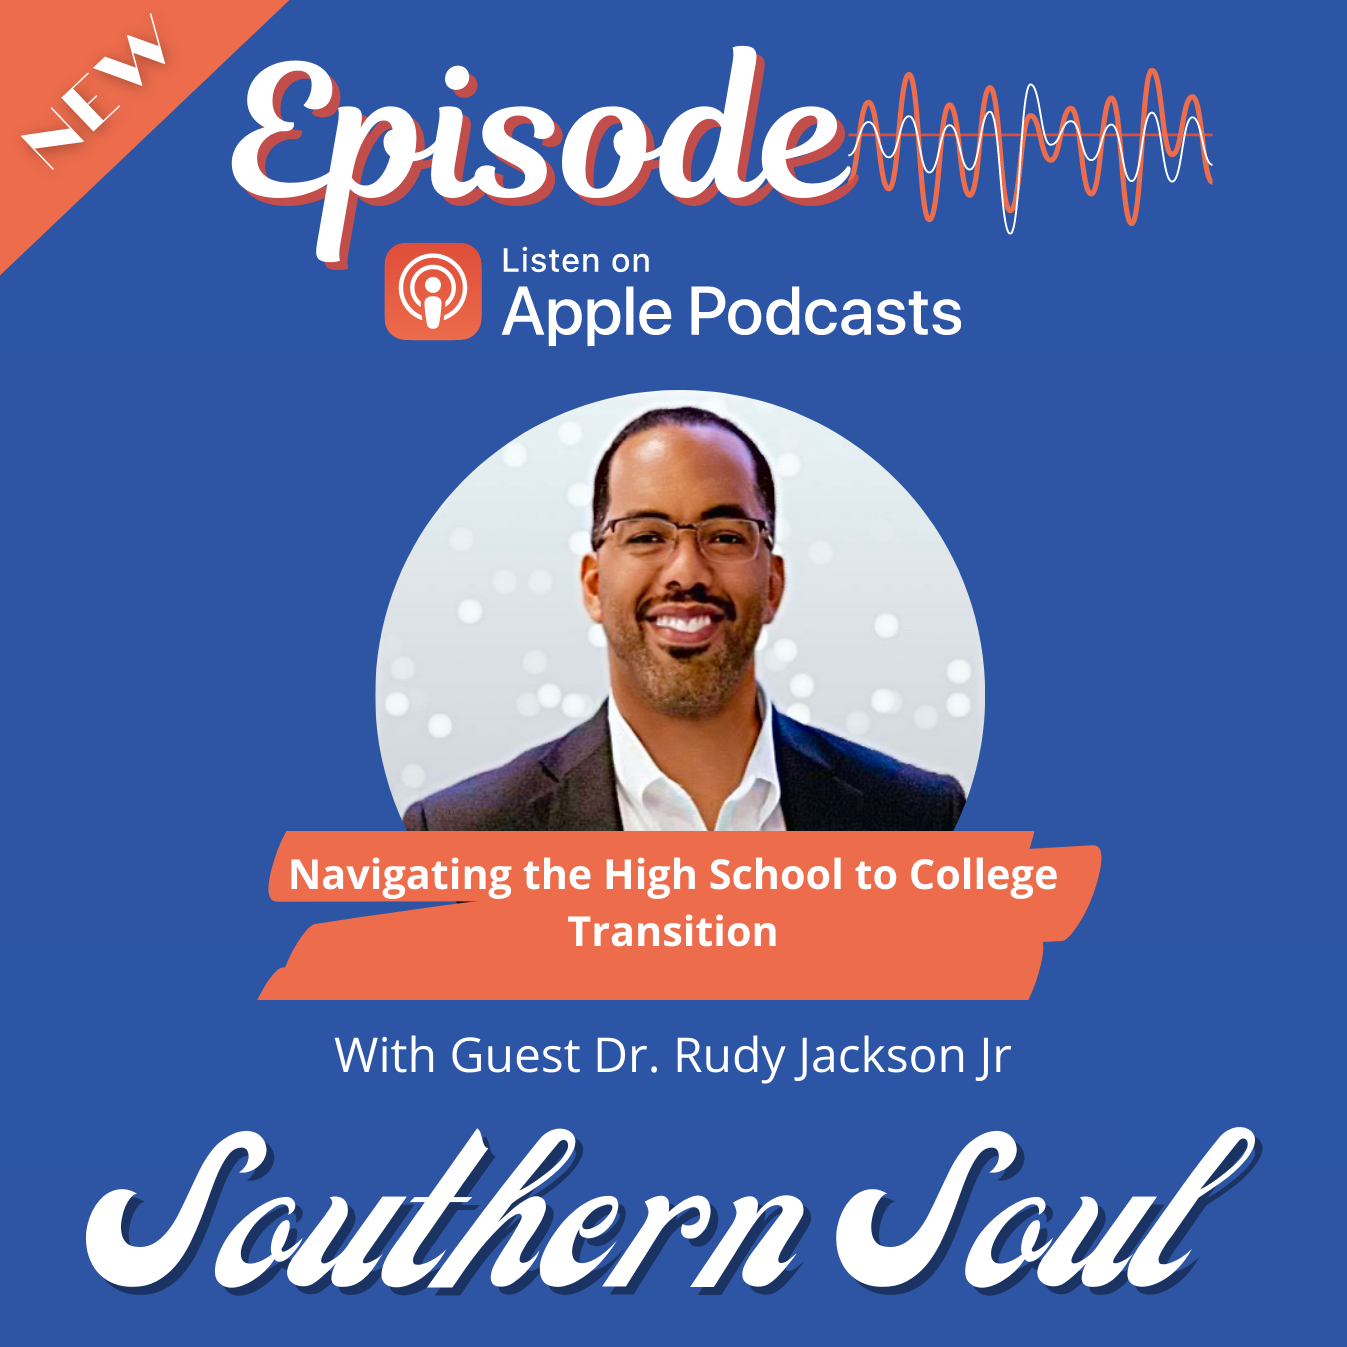 Navigating the High School to College Transition with Dr. Rudy Jackson Jr Image